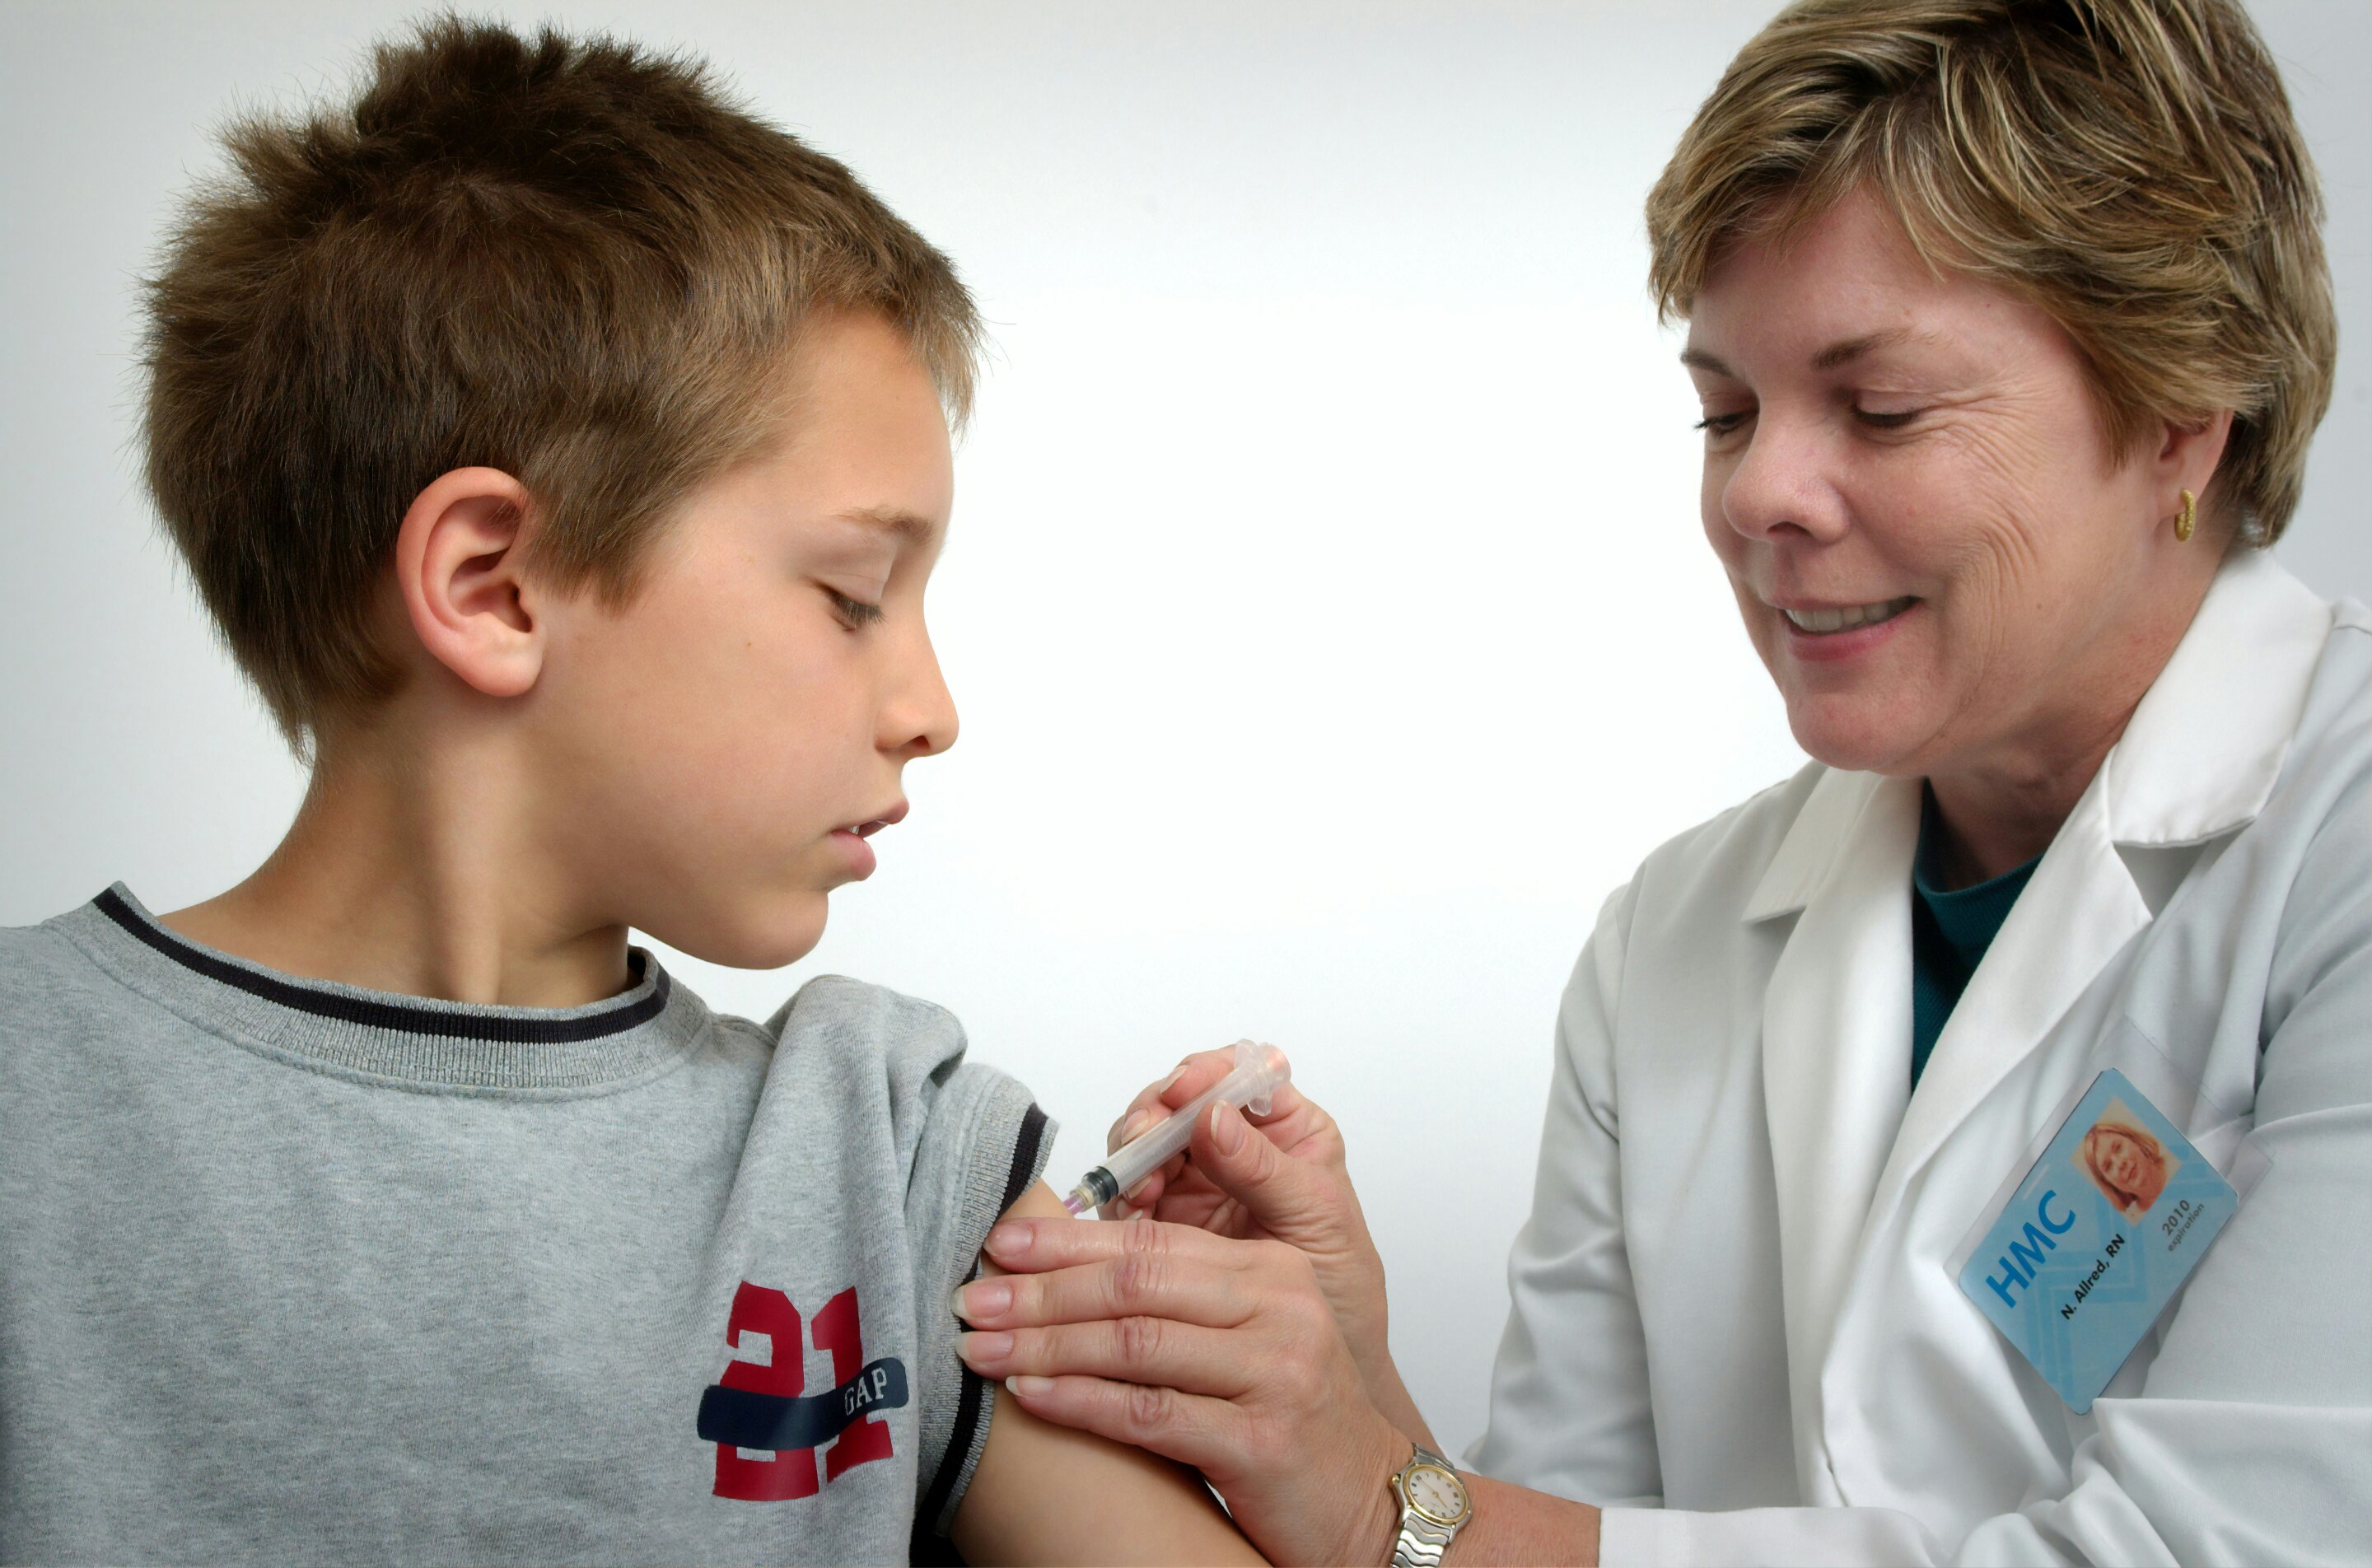 Study finds school entry requirements linked to increased HPV vaccination rates